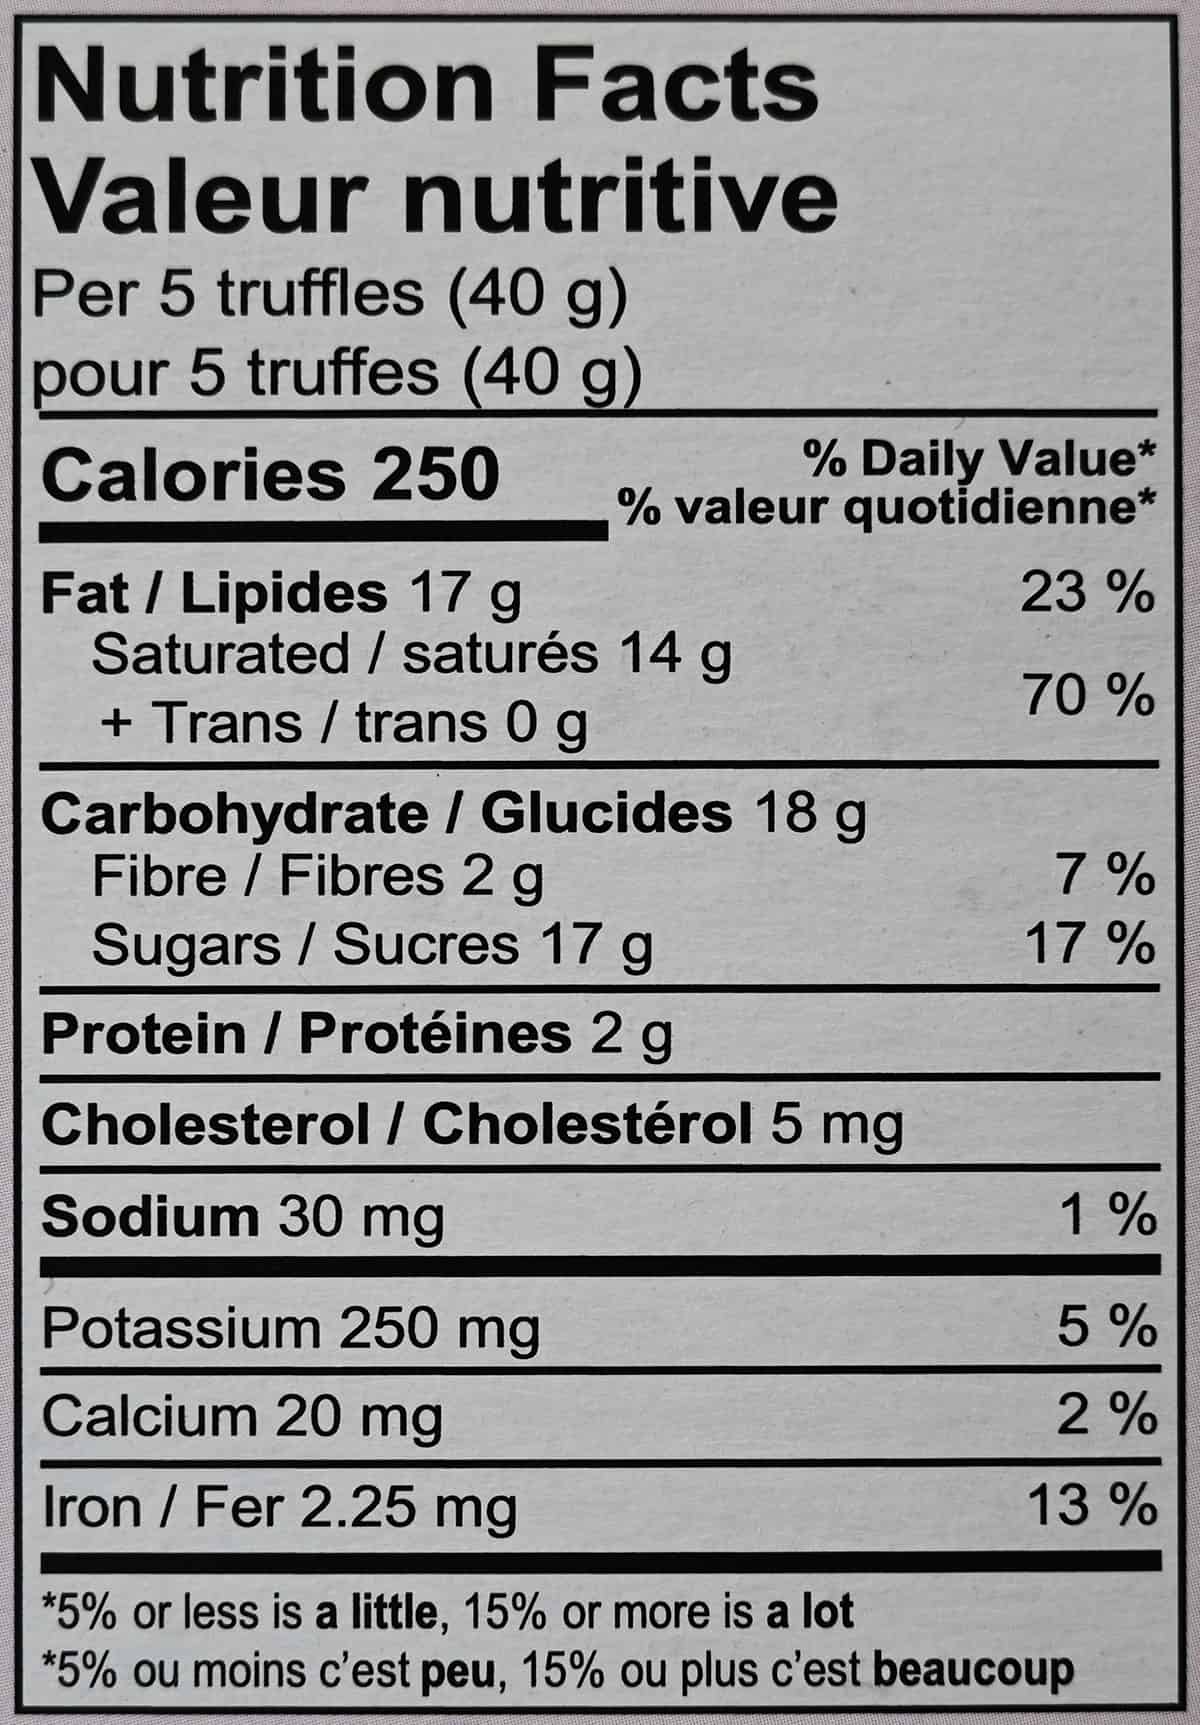 Image of the nutrition facts label for the truffles from the back of the box.